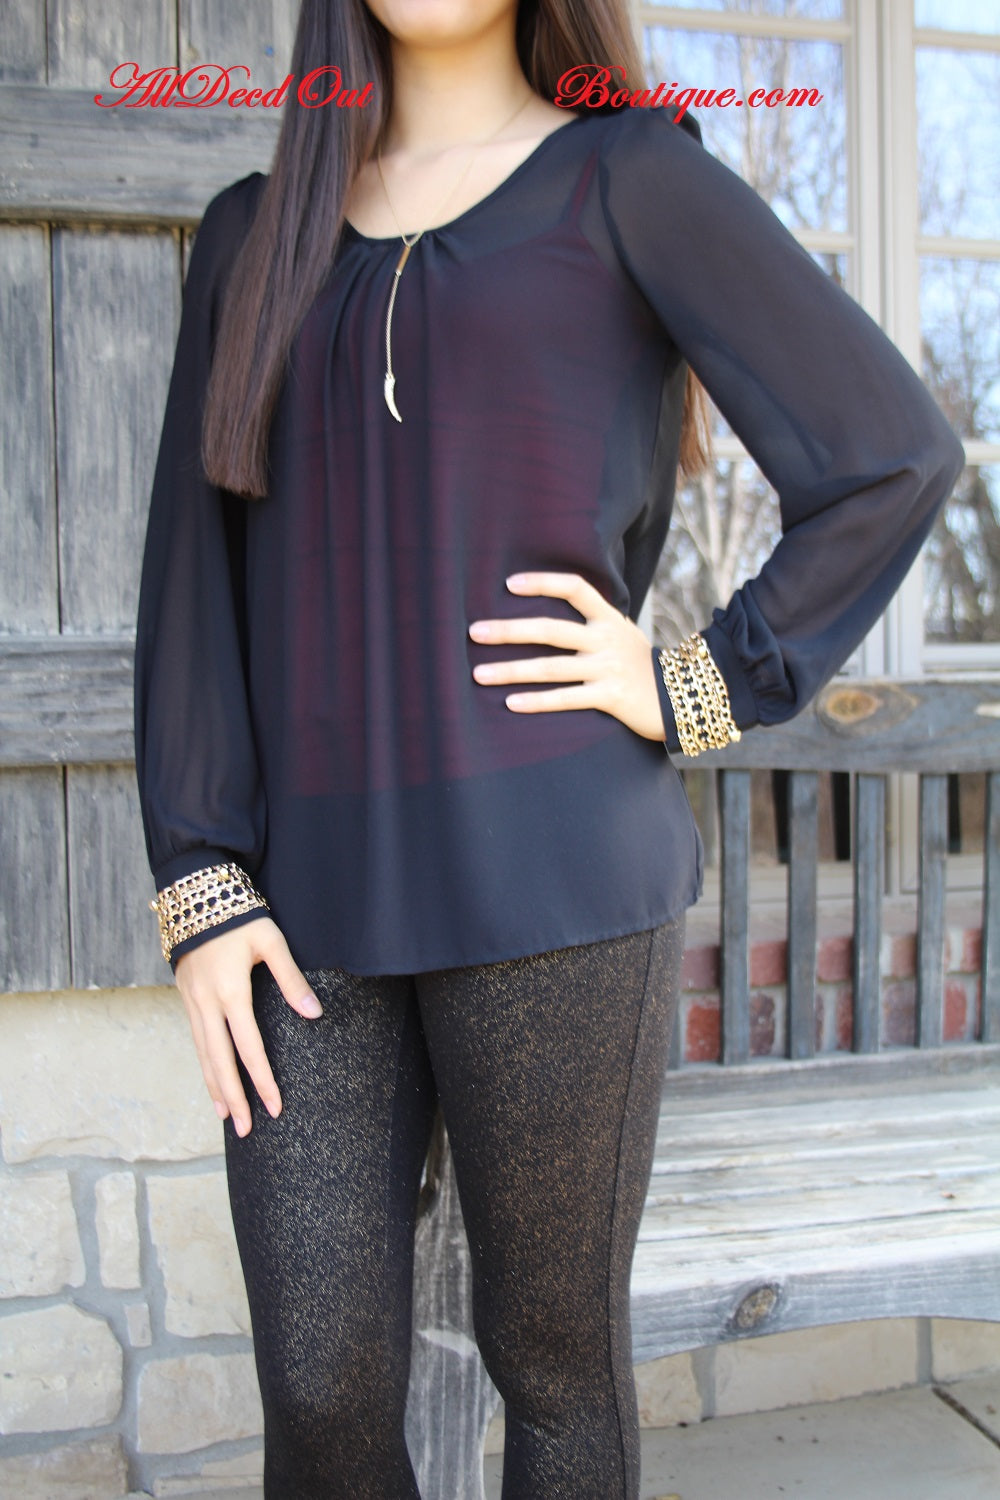 Double Zero | Black Sheer Top with Gold Chain Cuffs